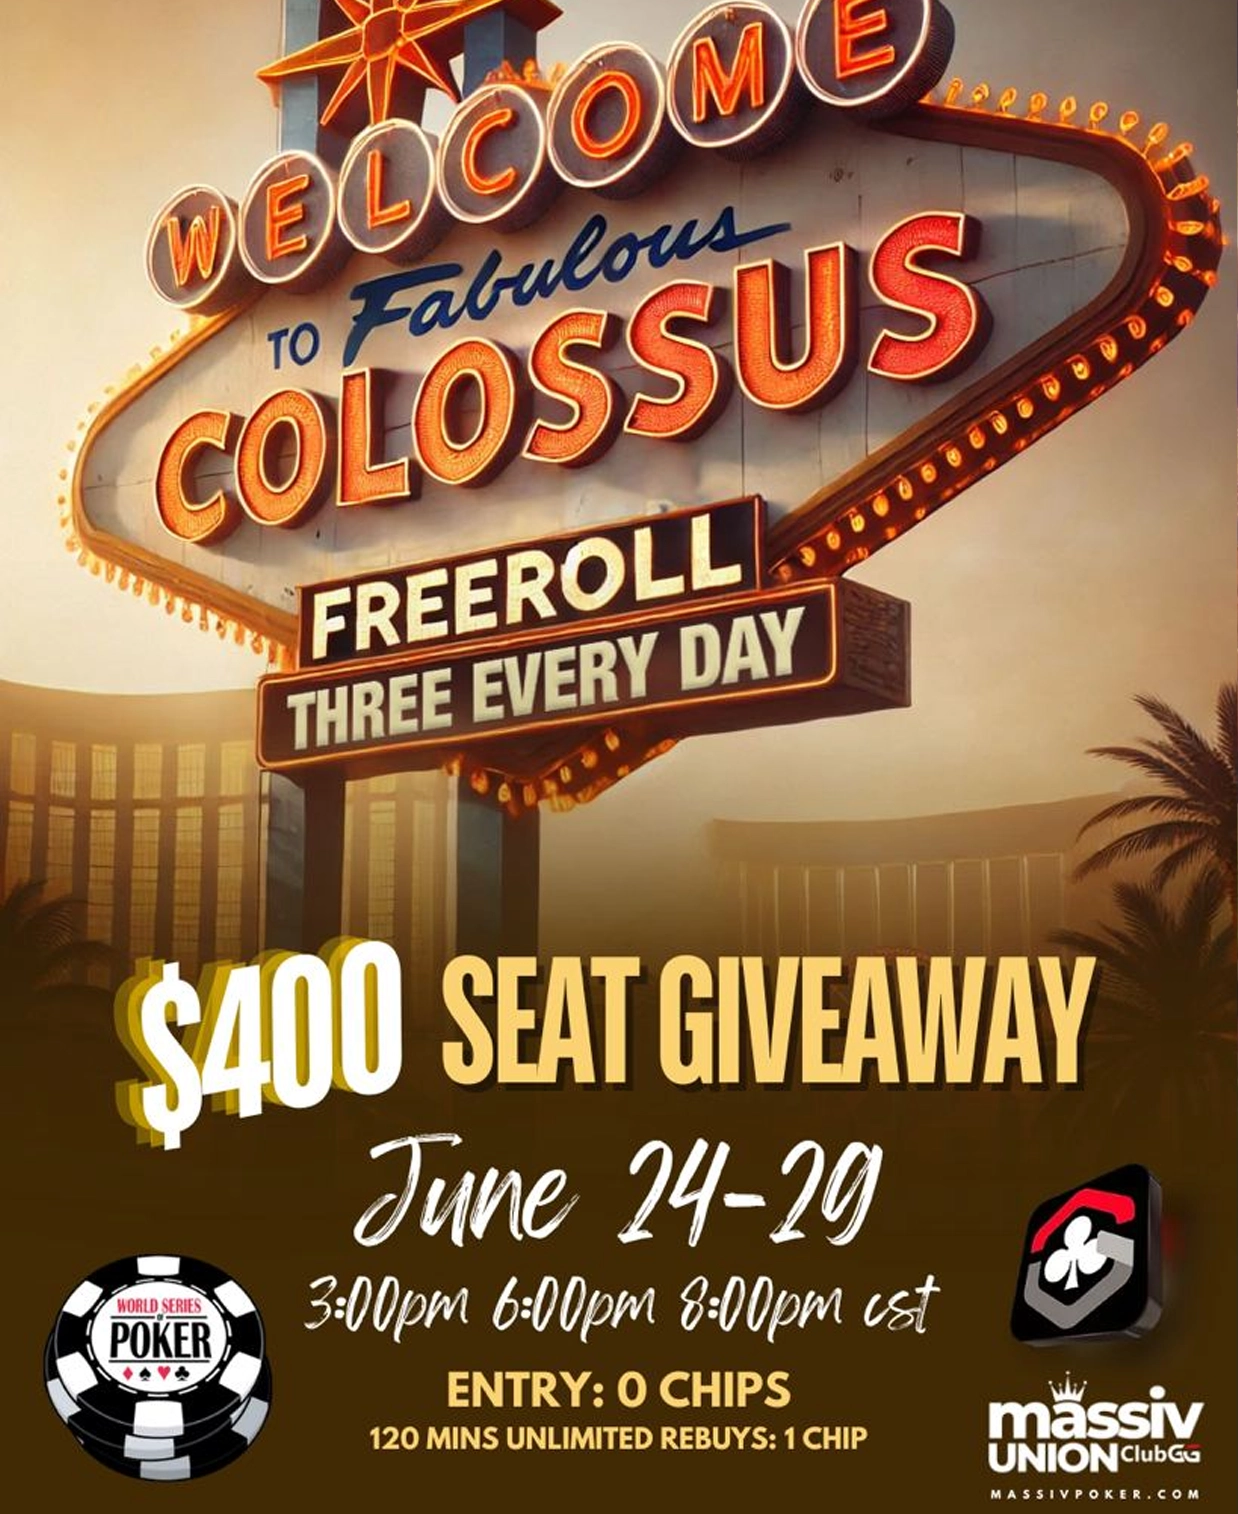 Colossus Seat Giveaway